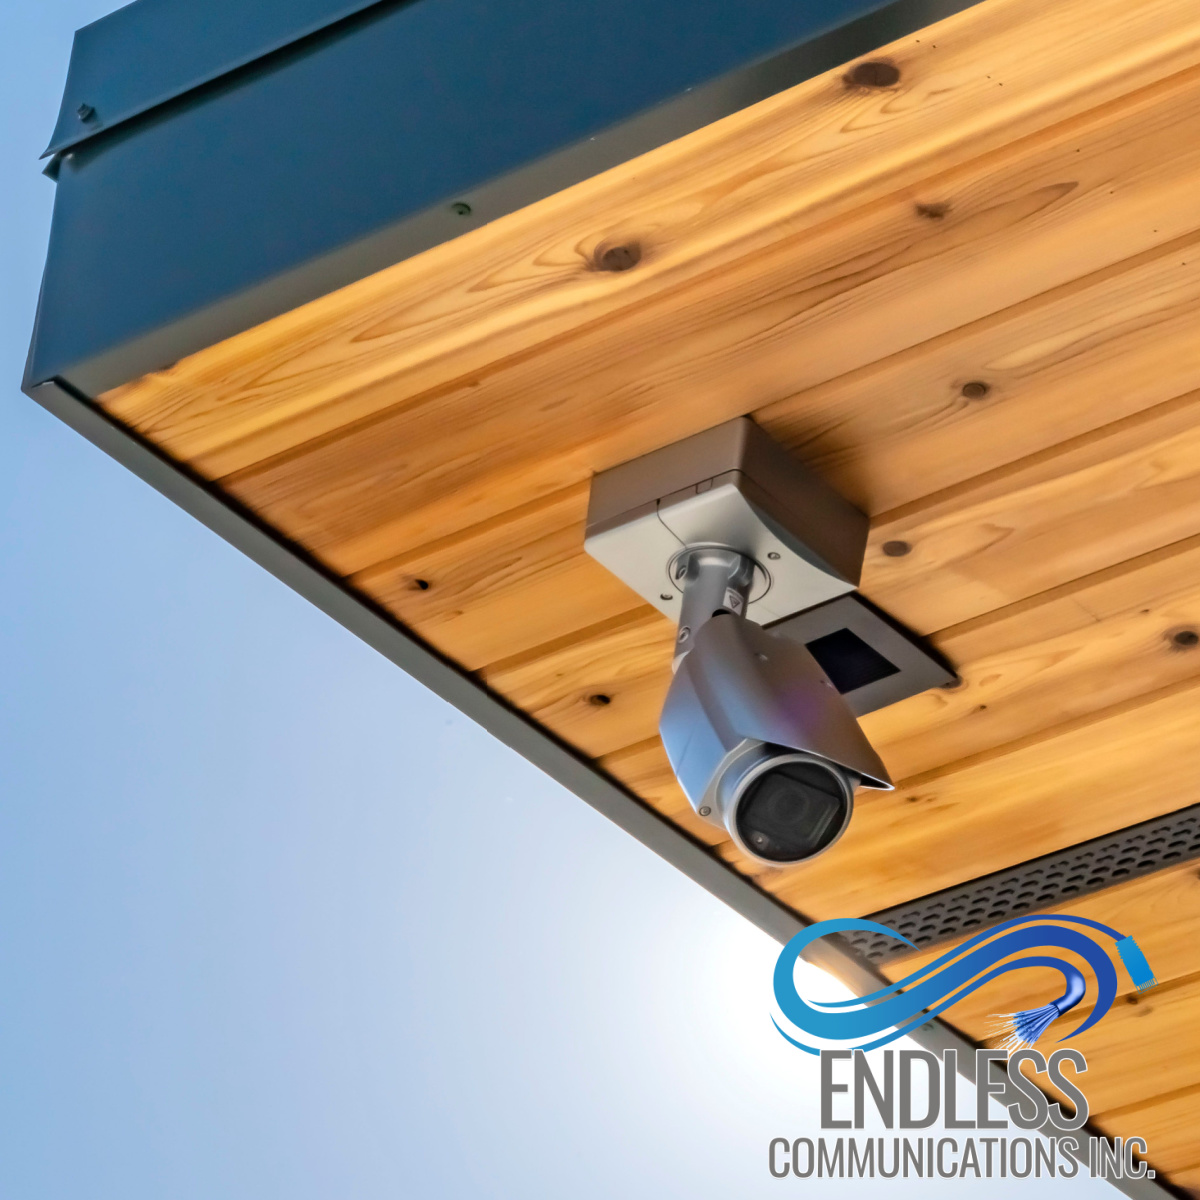 Enhancing Security: Endless Communications' Unparalleled Security Camera Service in Banning